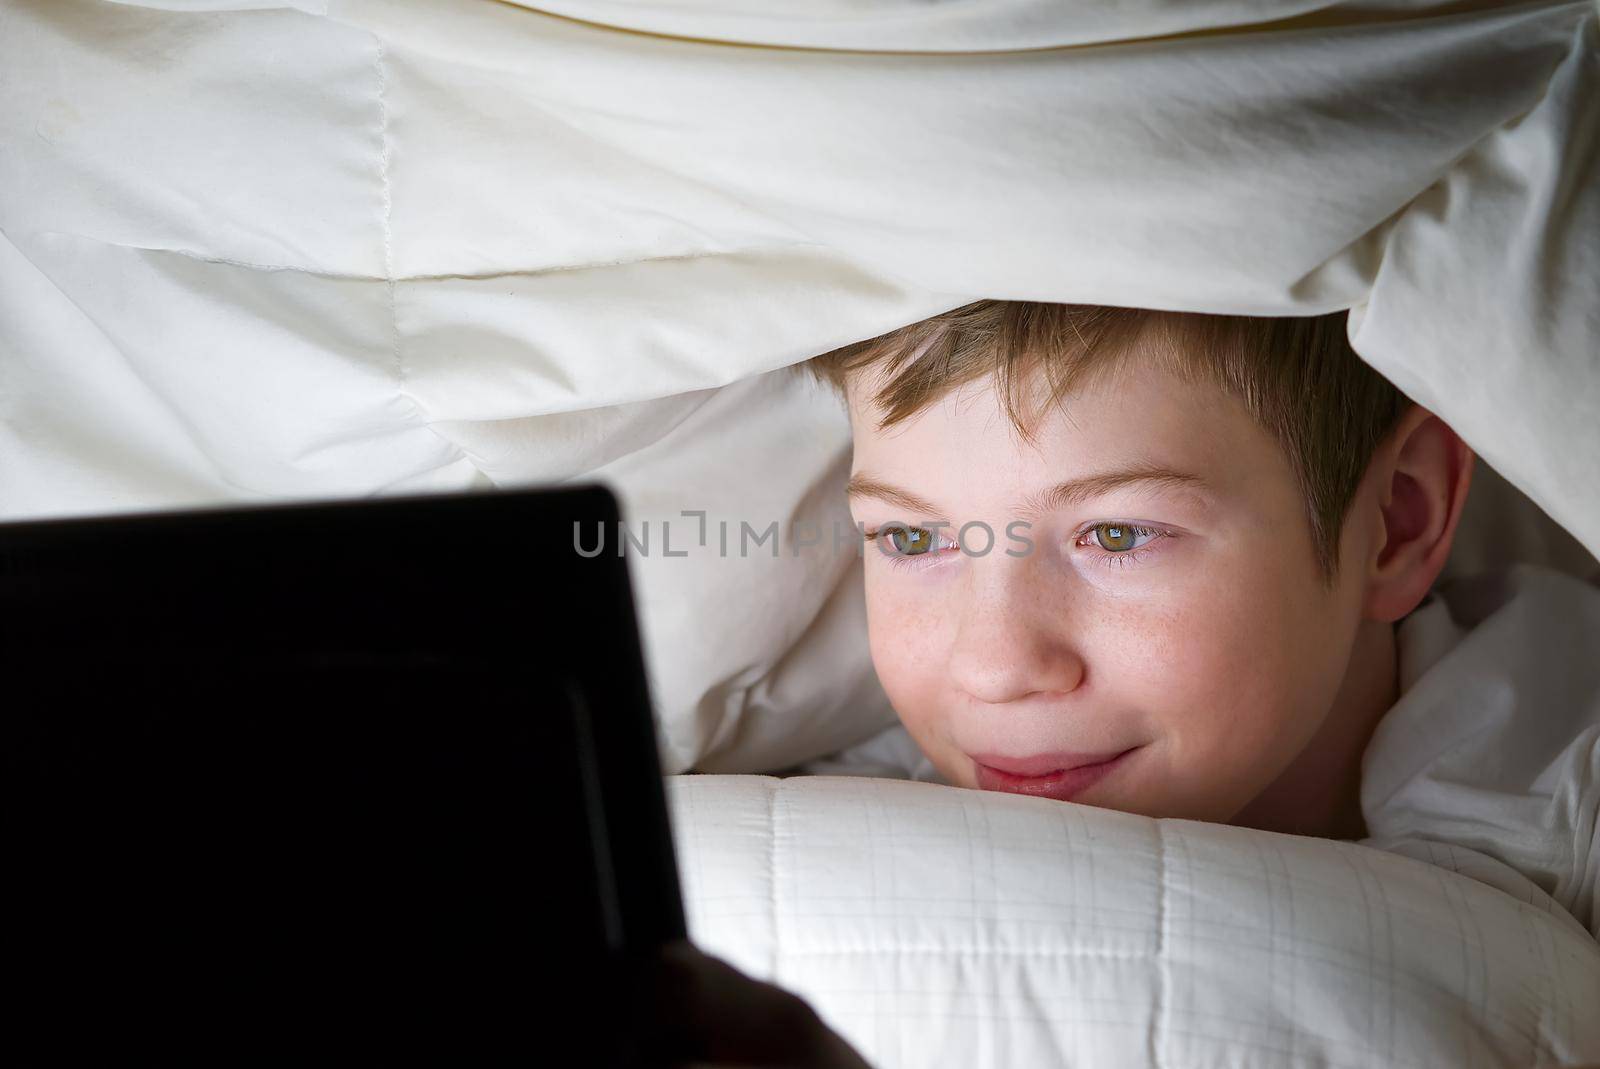 Quarantine. Distance learning. Online education. Happy boy in bed under blanket with tablet in dark. Child's face is illuminated by bright monitor. social media addiction. internet addiction.